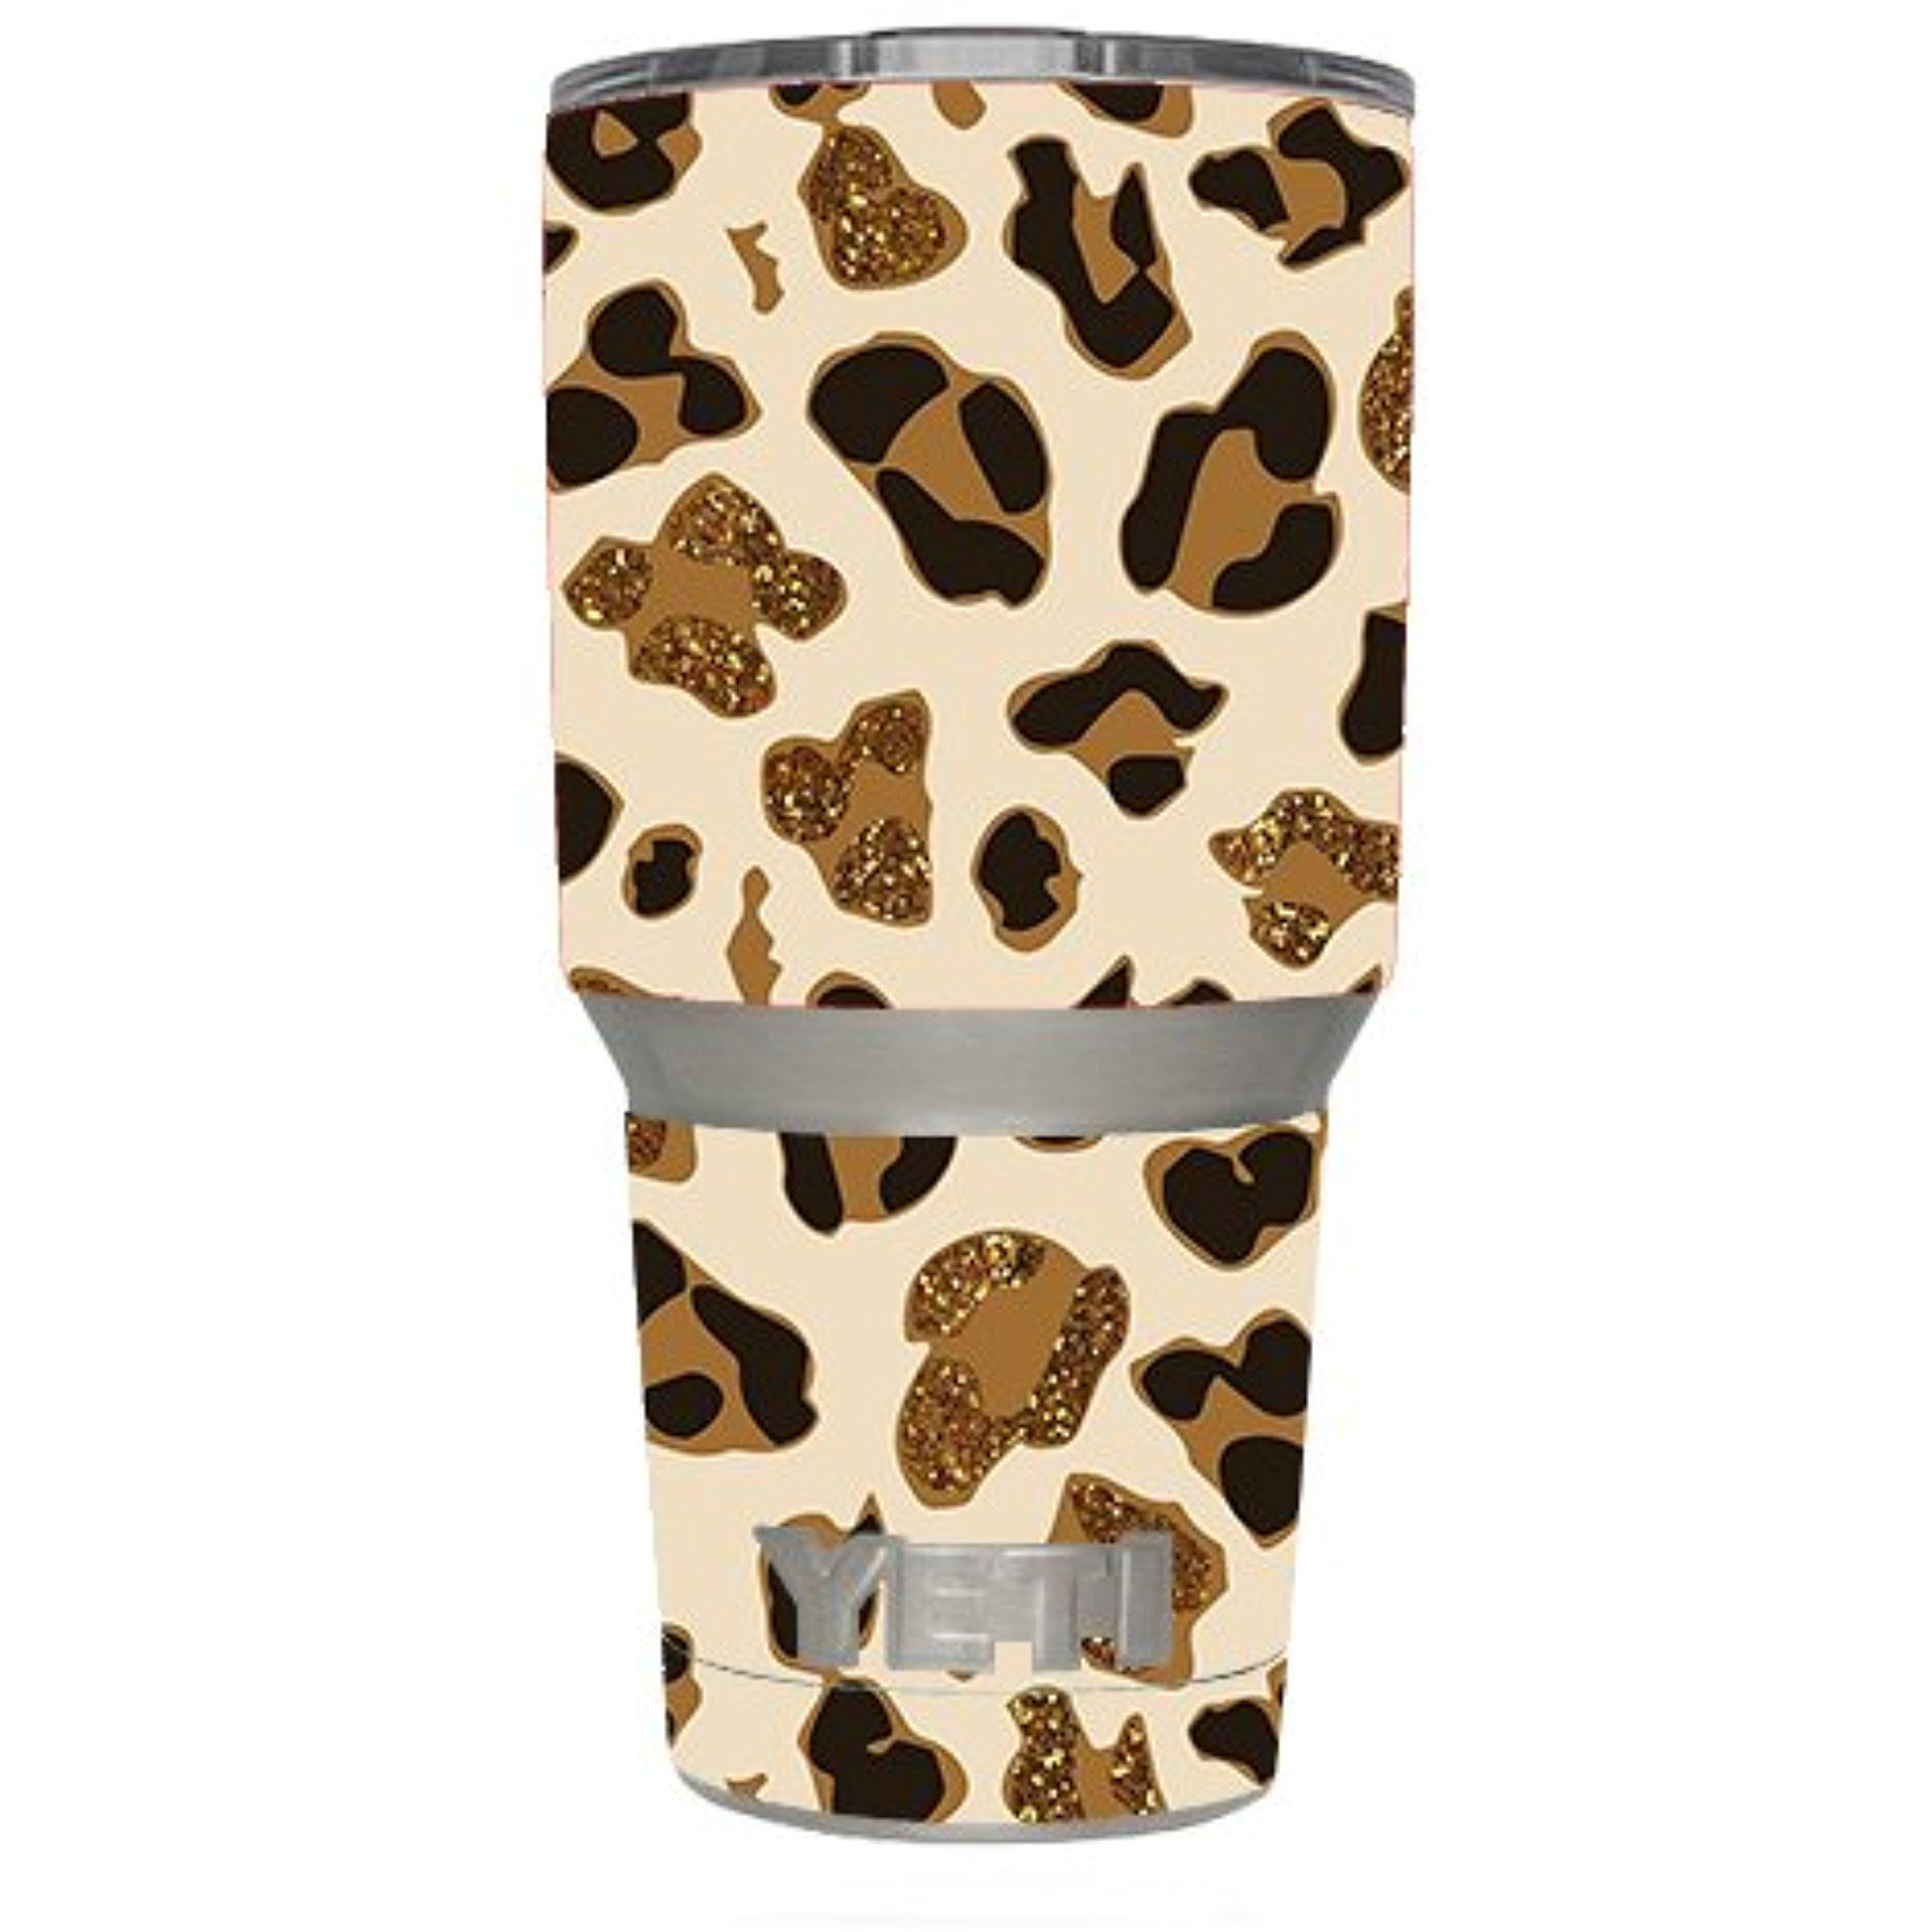 Skin Decal Vinyl Wrap for Yeti 30 oz Rambler Tumbler Cup (6-piece kit)  Stickers Skins Cover / Leopard Print Glitter Print (not real glitter) -  